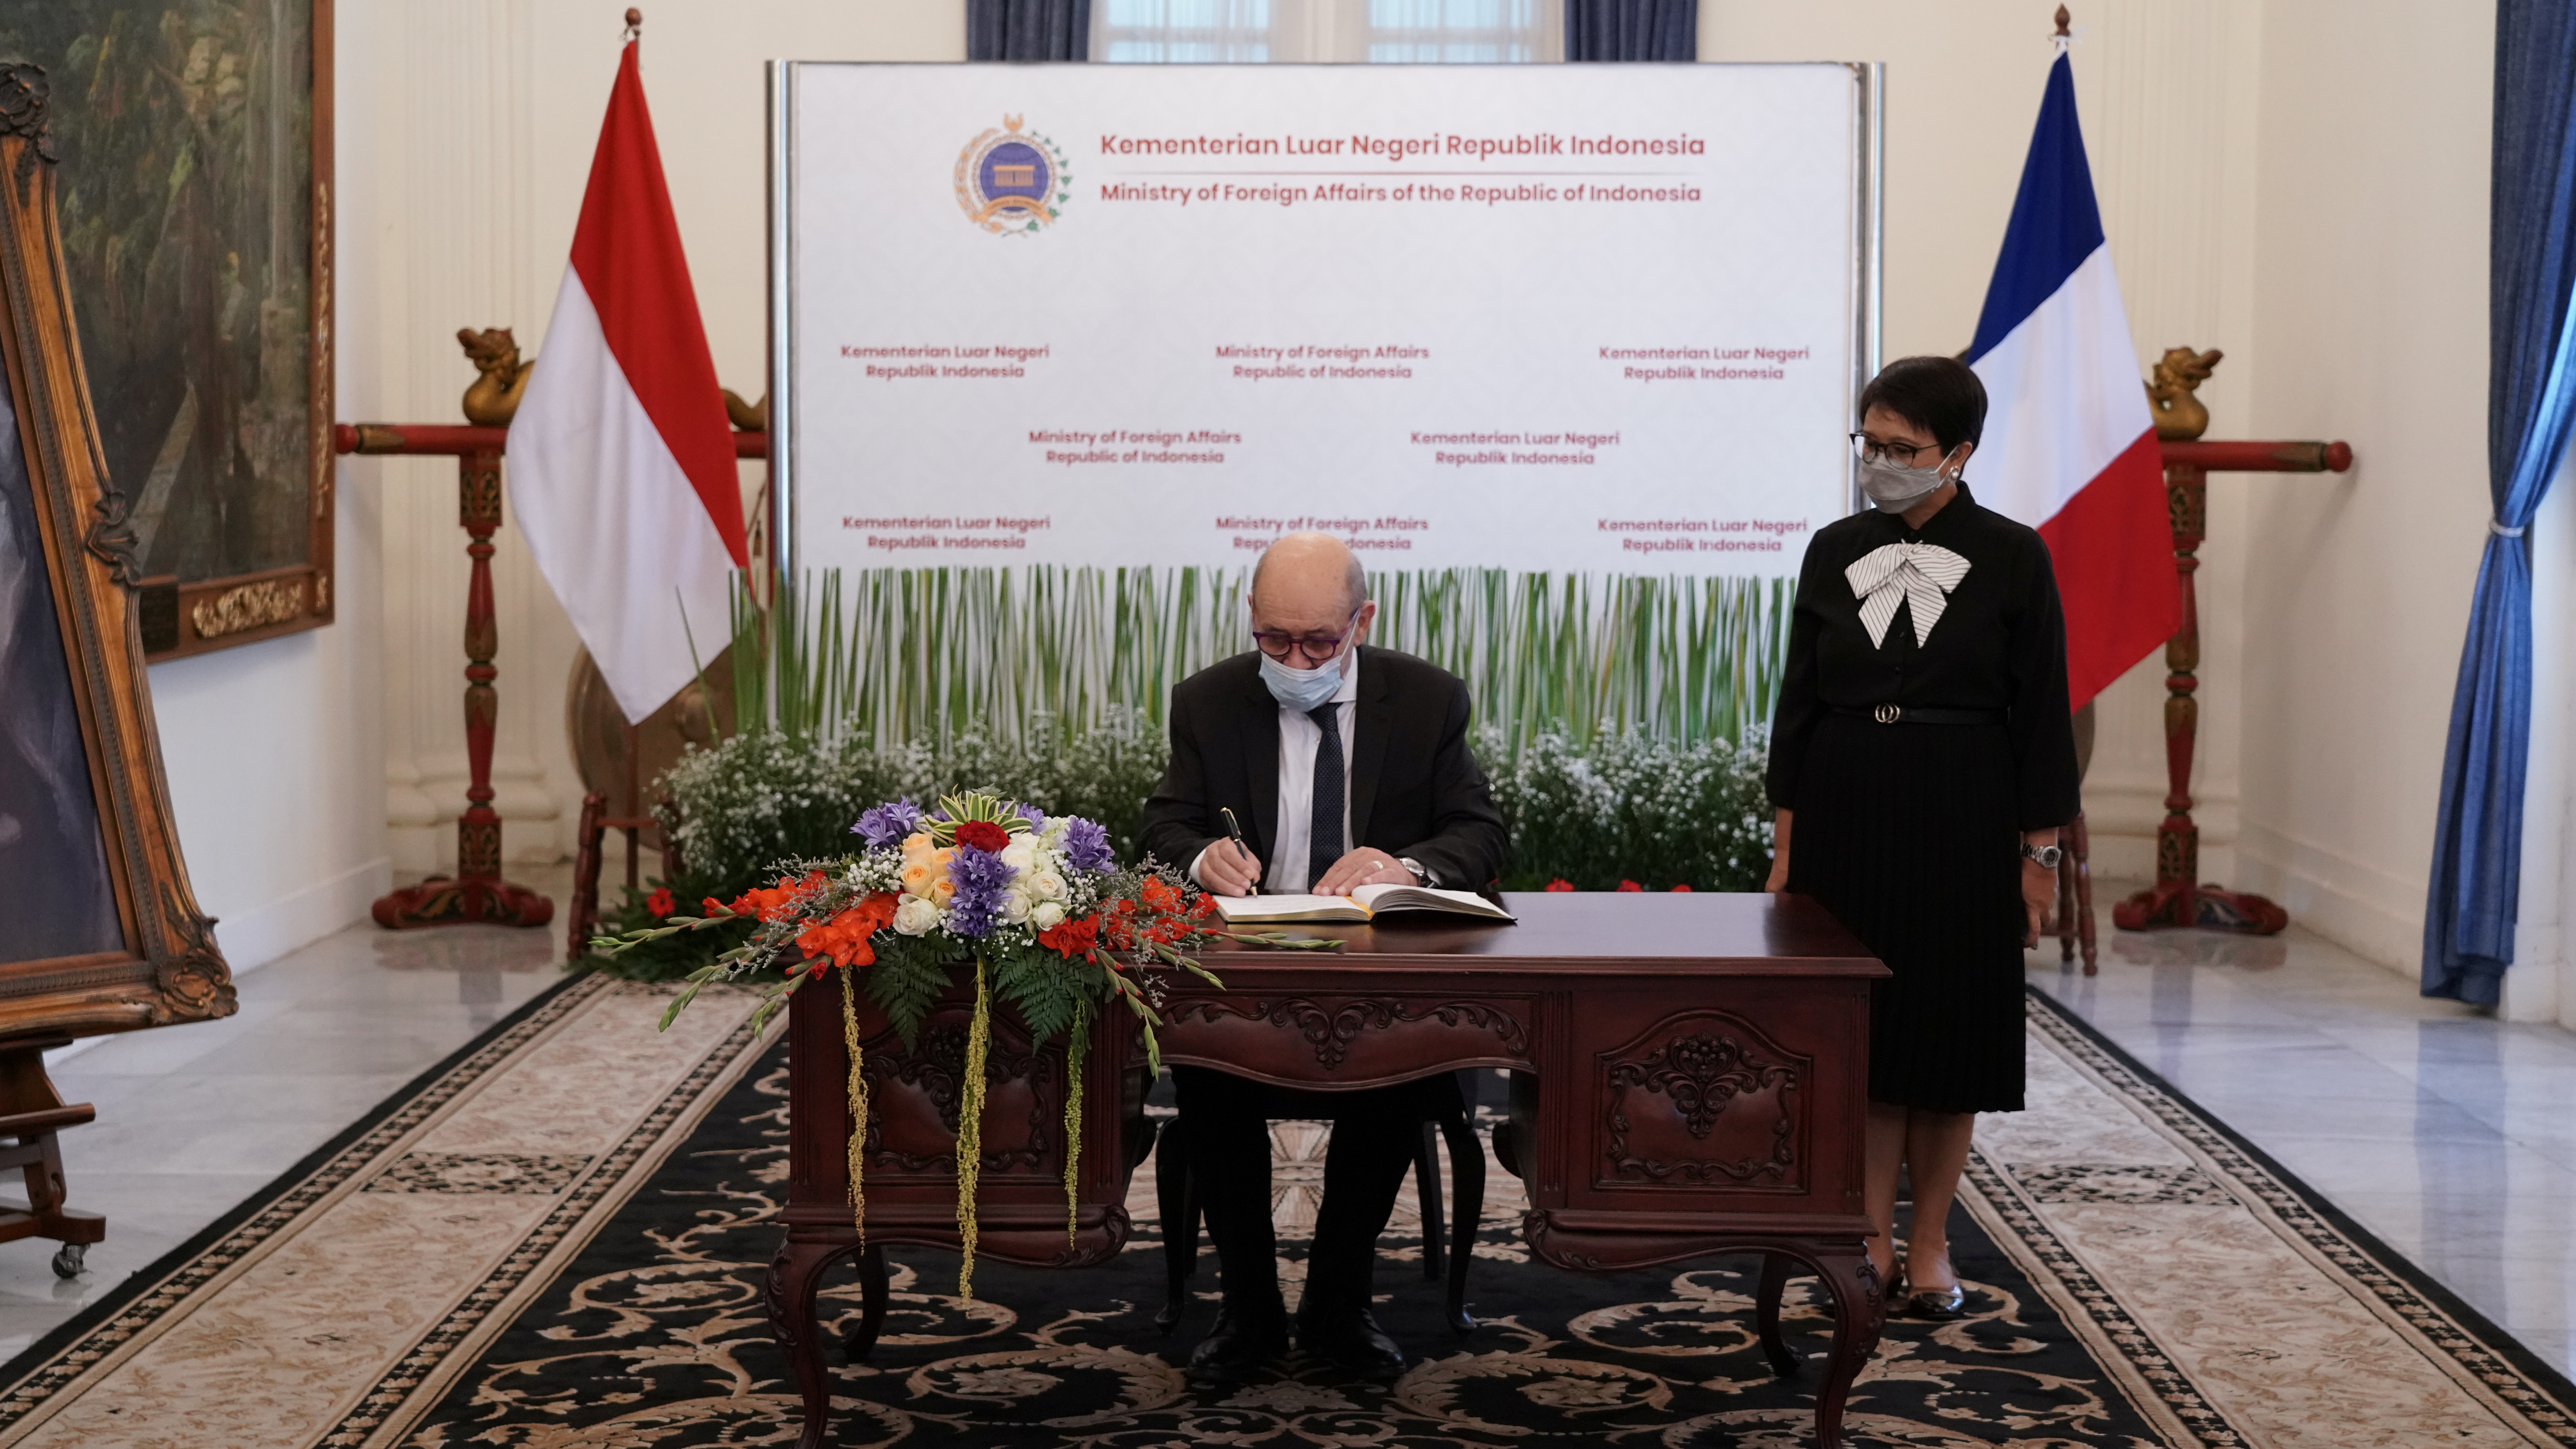 French Foreign Minister Jean-Yves Le Drian signs a guest book as Indonesian Foreign Minister Retno Marsudi watches before their meeting in Jakarta